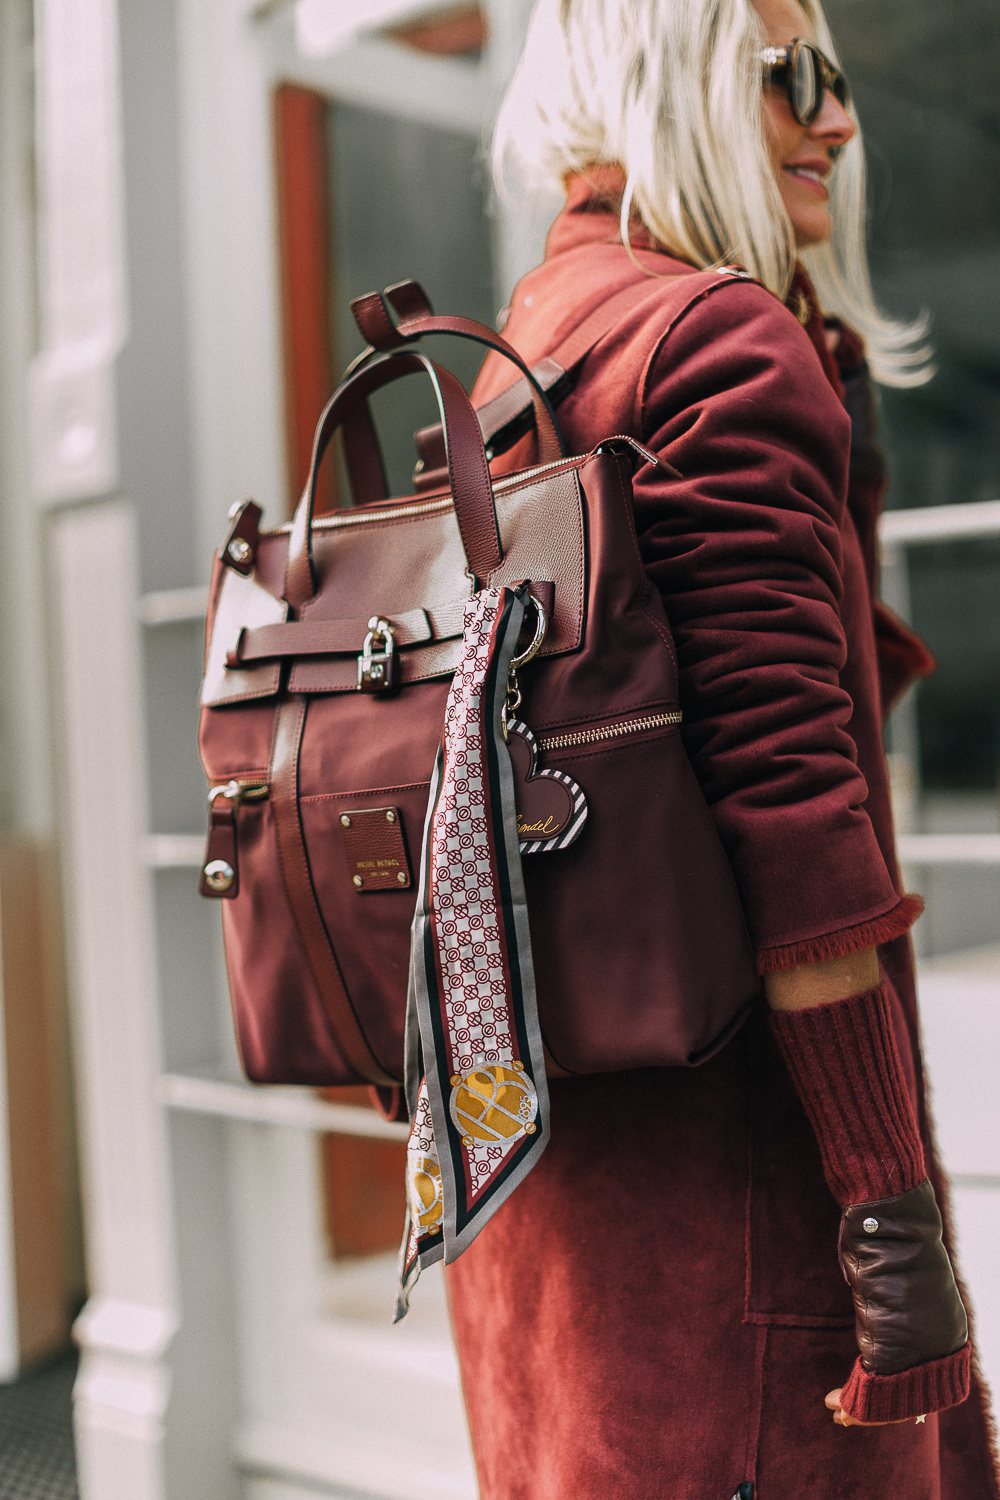 burgundy Jetsetter backpack paired with burgundy plush coat, cropped Moussy jeans, Stuart Weitzman sock booties and fingerless gloves